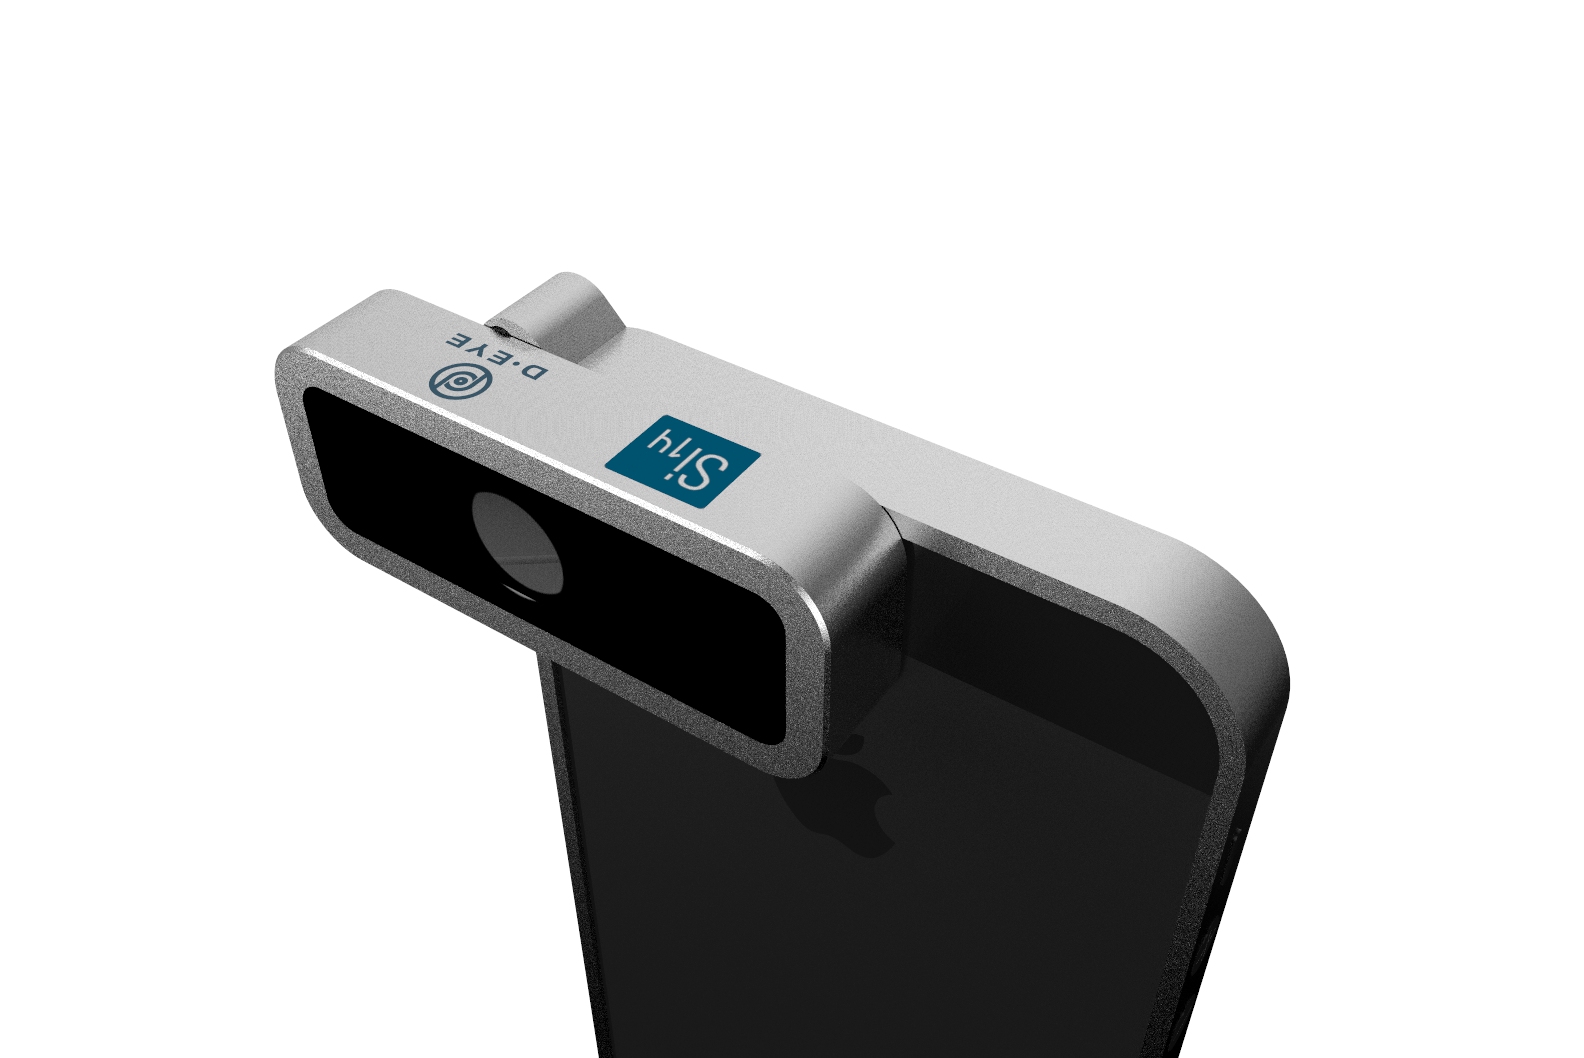 The D-EYE fundoscopic lens for smartphones